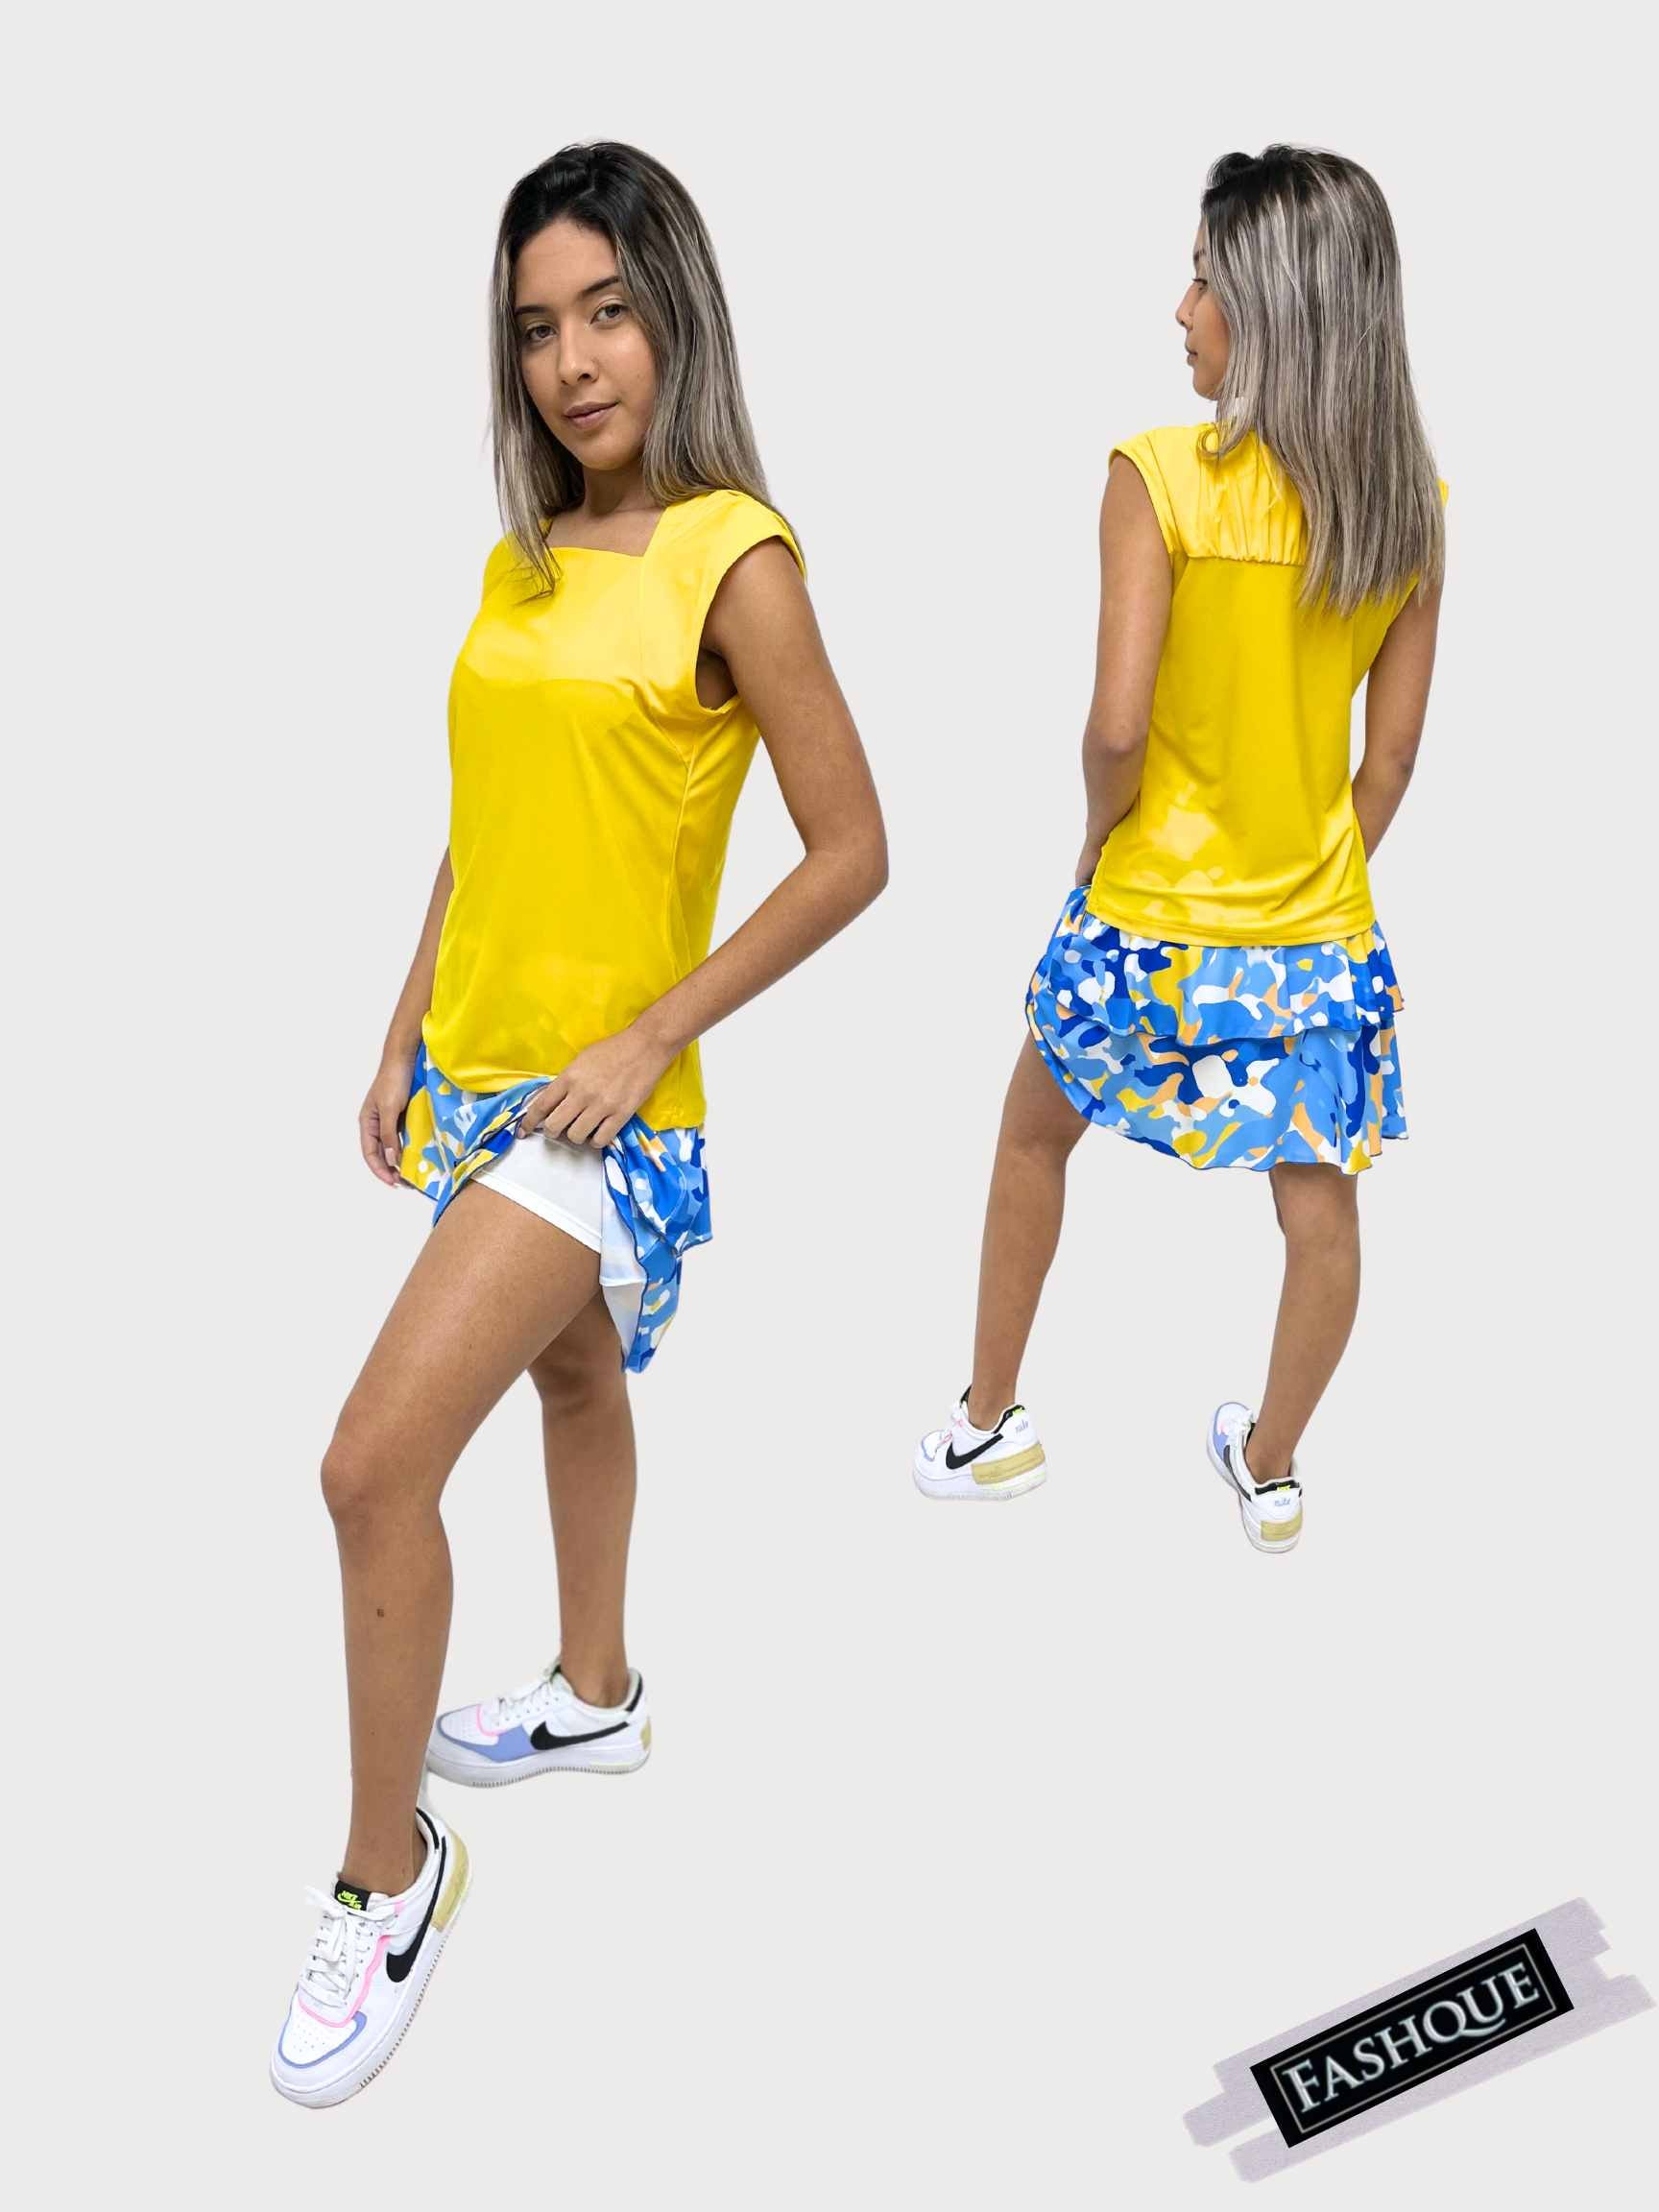 FASHQUE - 3 Tier DIGITAL PRINT SKORT with the Ruffle in the center - SH2001